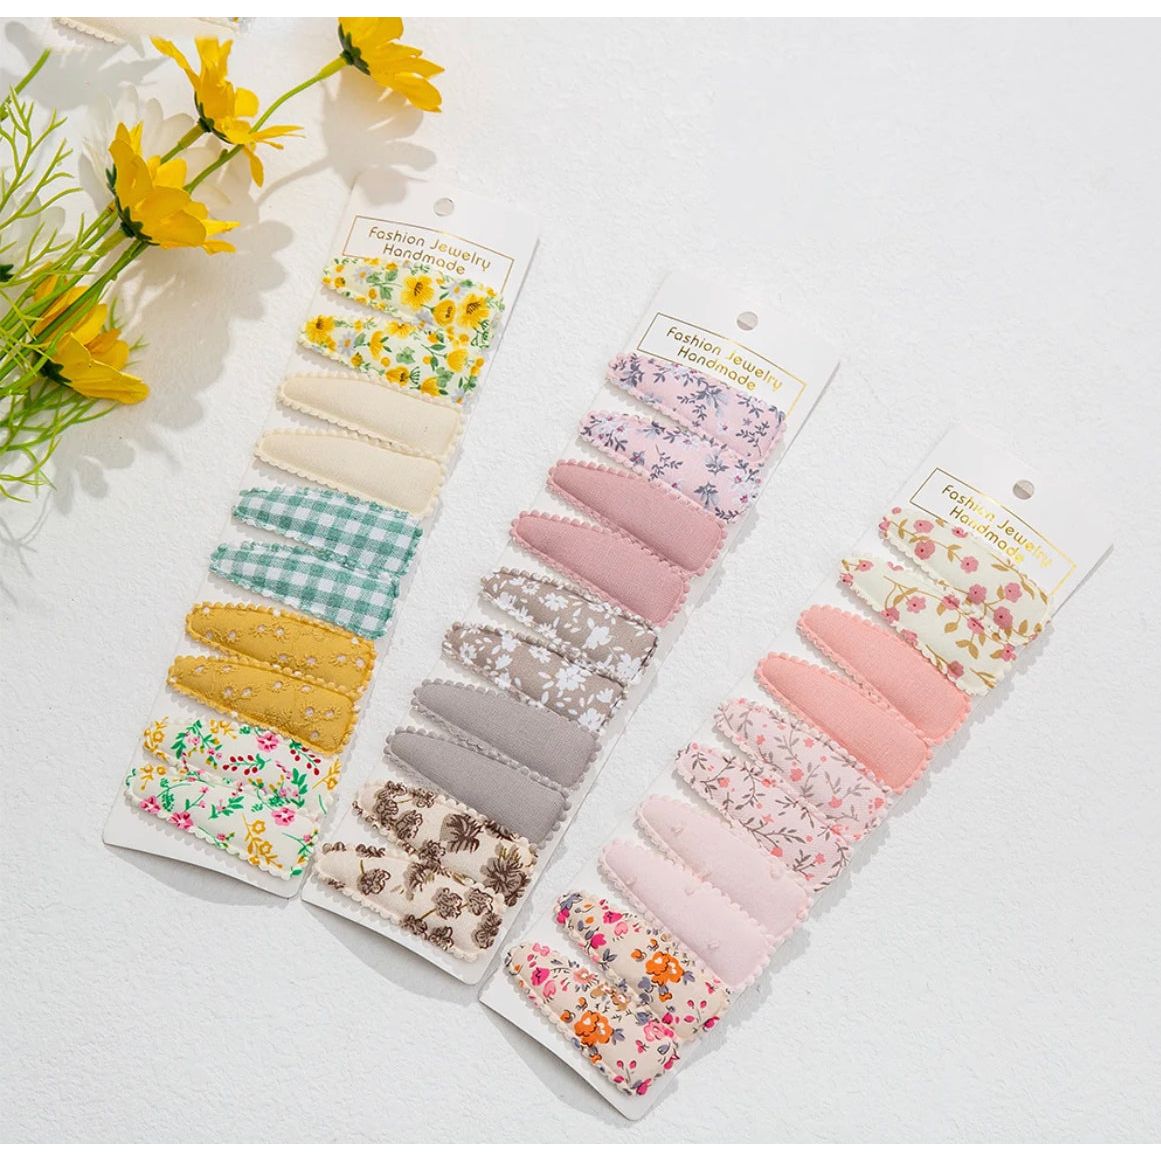 Pibi Printed Fabric Plaid Hair Clips (6 cm)  Set of 10 Dp103 Assorted Multicolor Age- 12 Months & Above